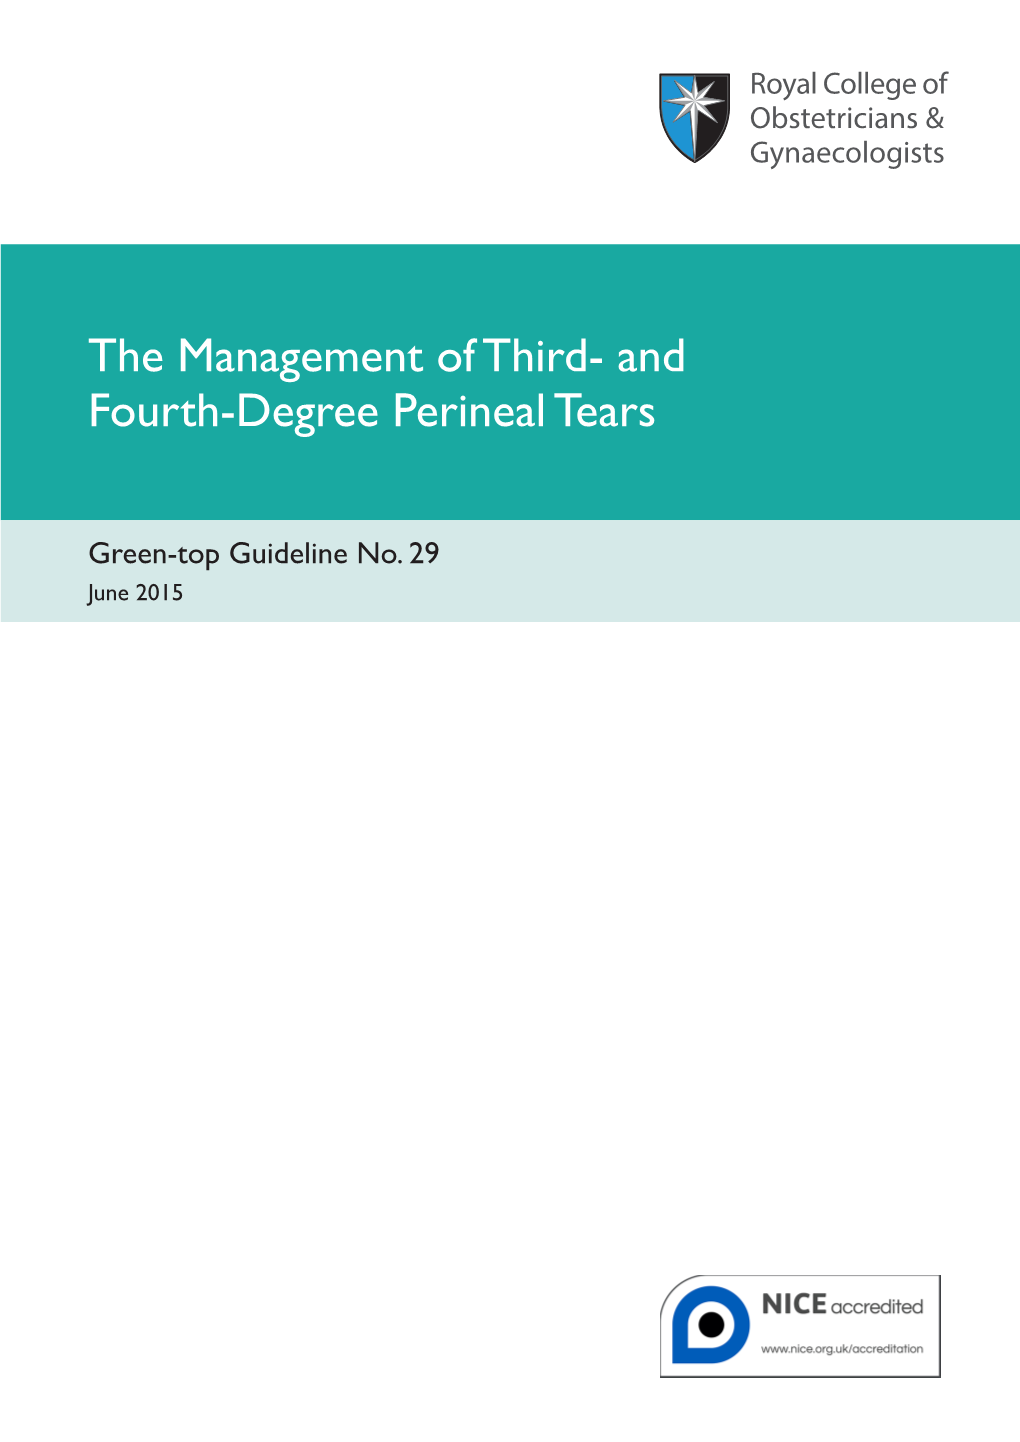 The Management of Third- and Fourth-Degree Perineal Tears